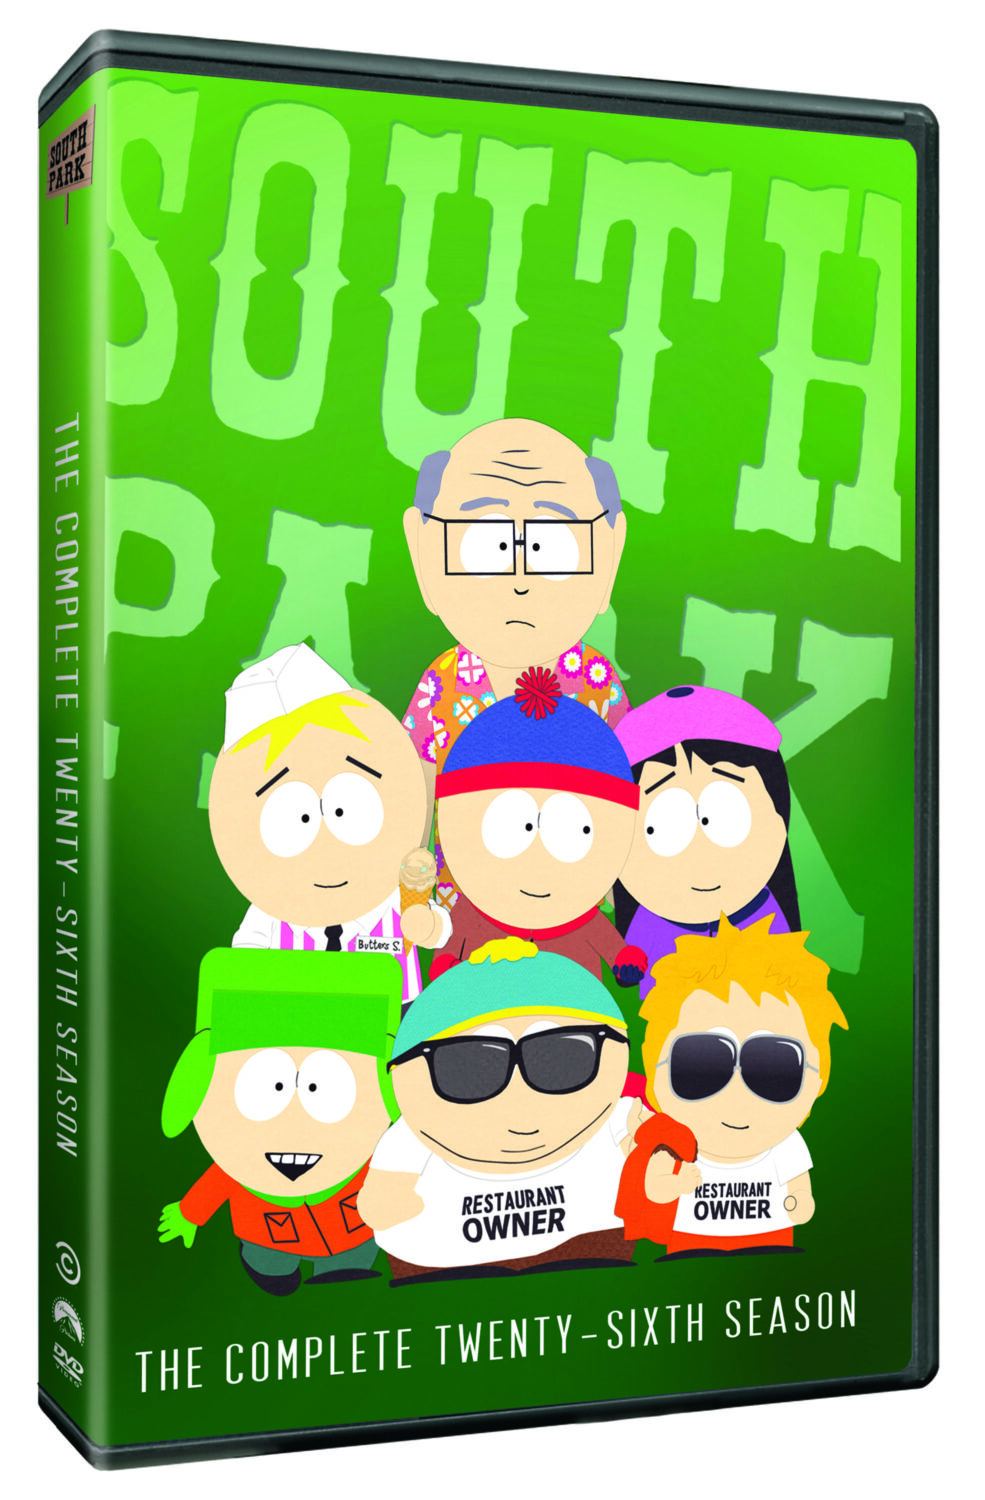 South Park' season 25 release date: Comedy Central announces new show  season in February